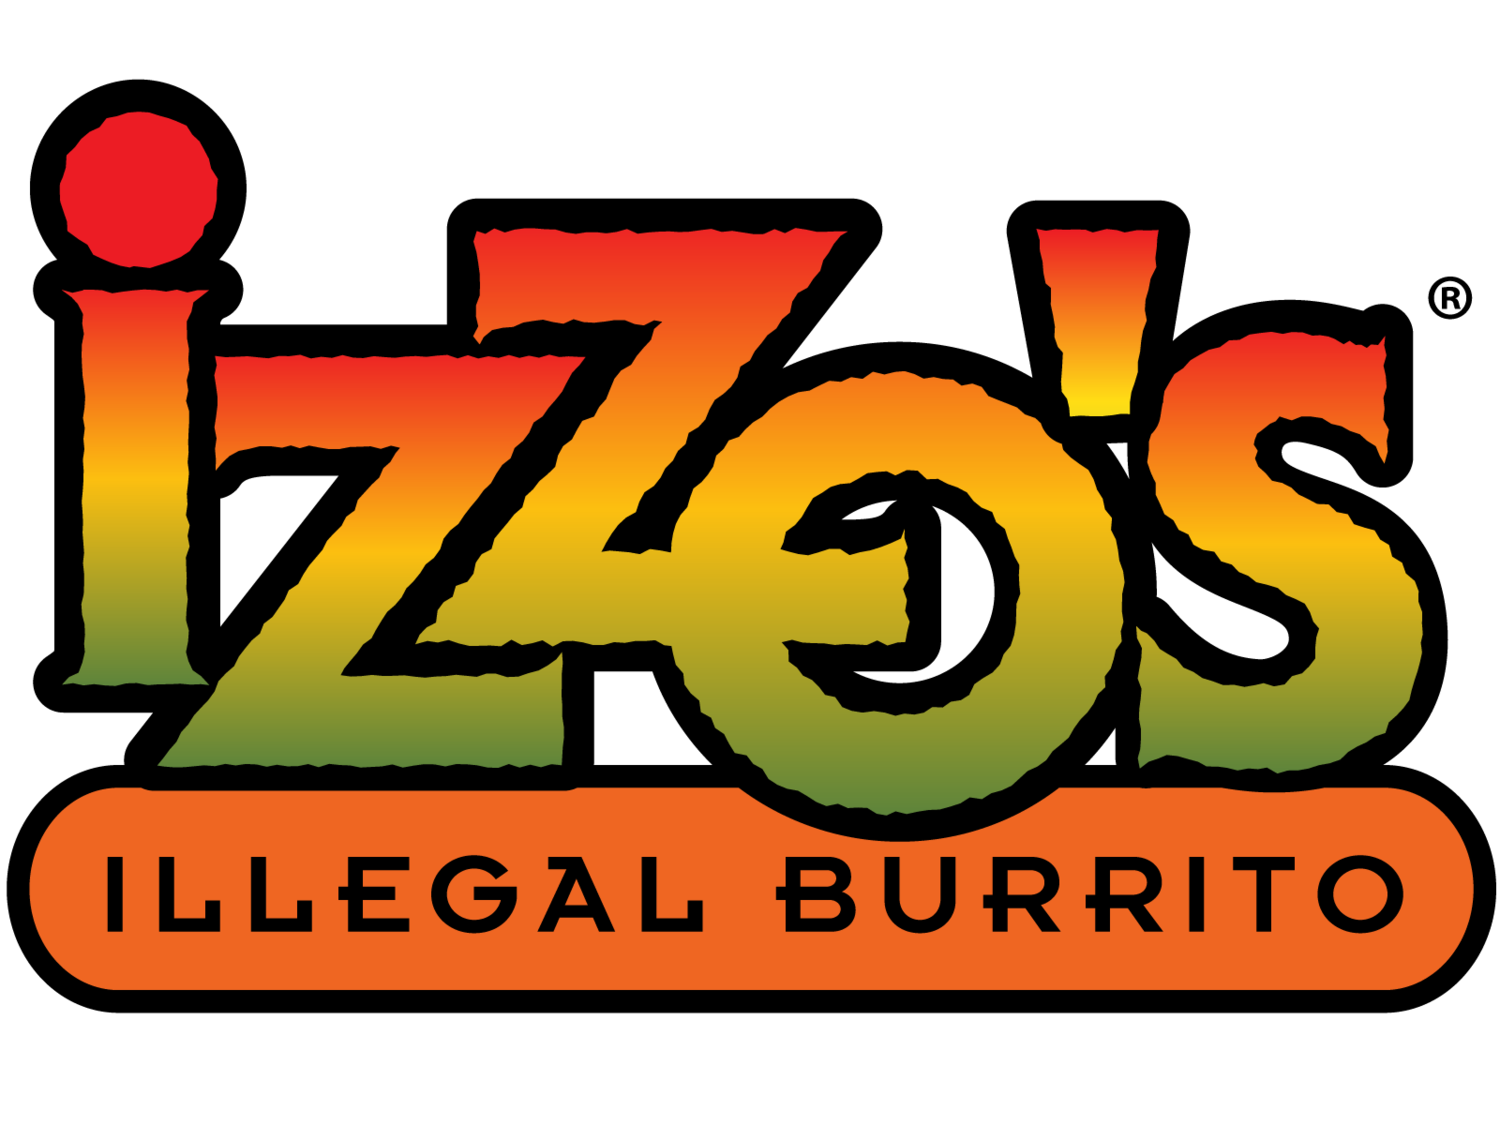 Izzos.png